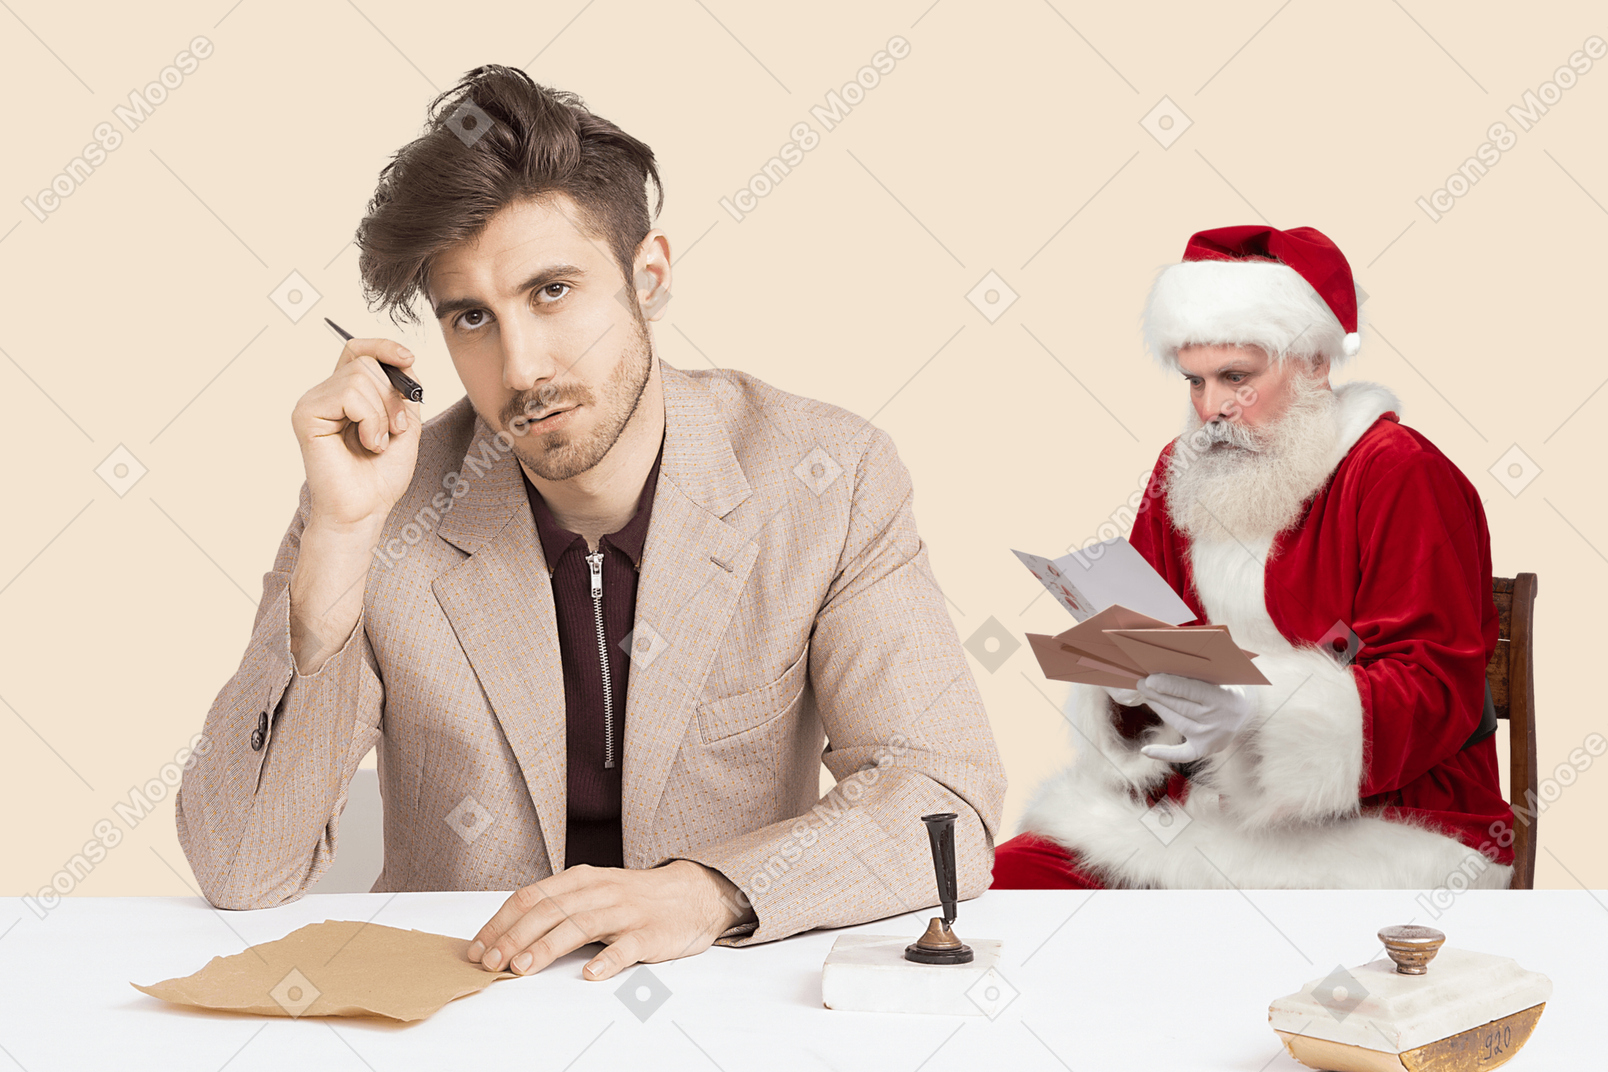 Attractive man composing a letter while santa claus going through his mail in the background